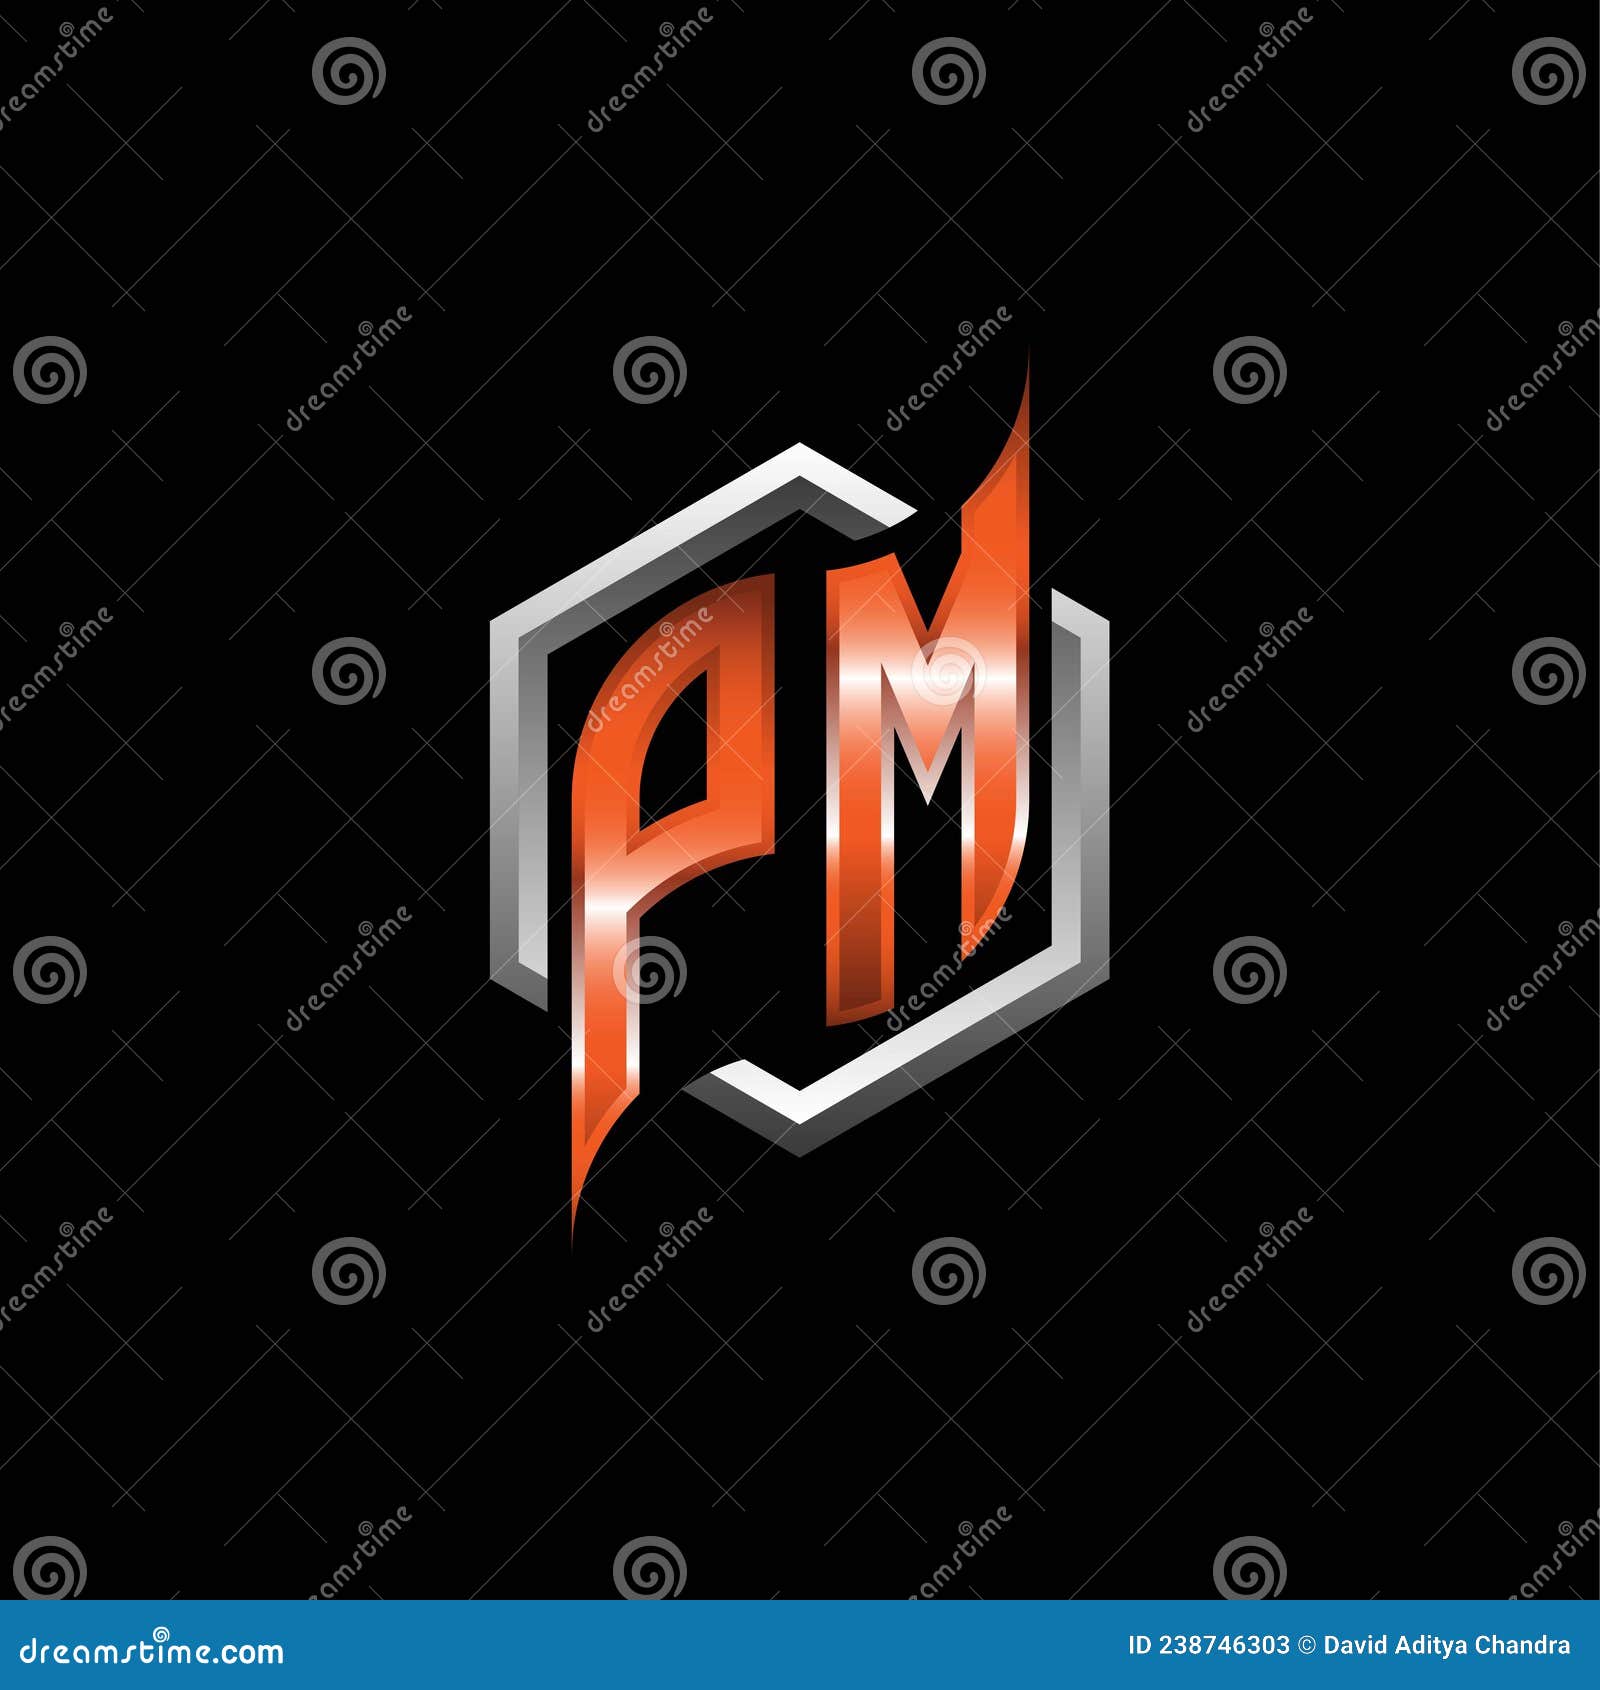 Pm monogram logo with square rotate style outline Vector Image